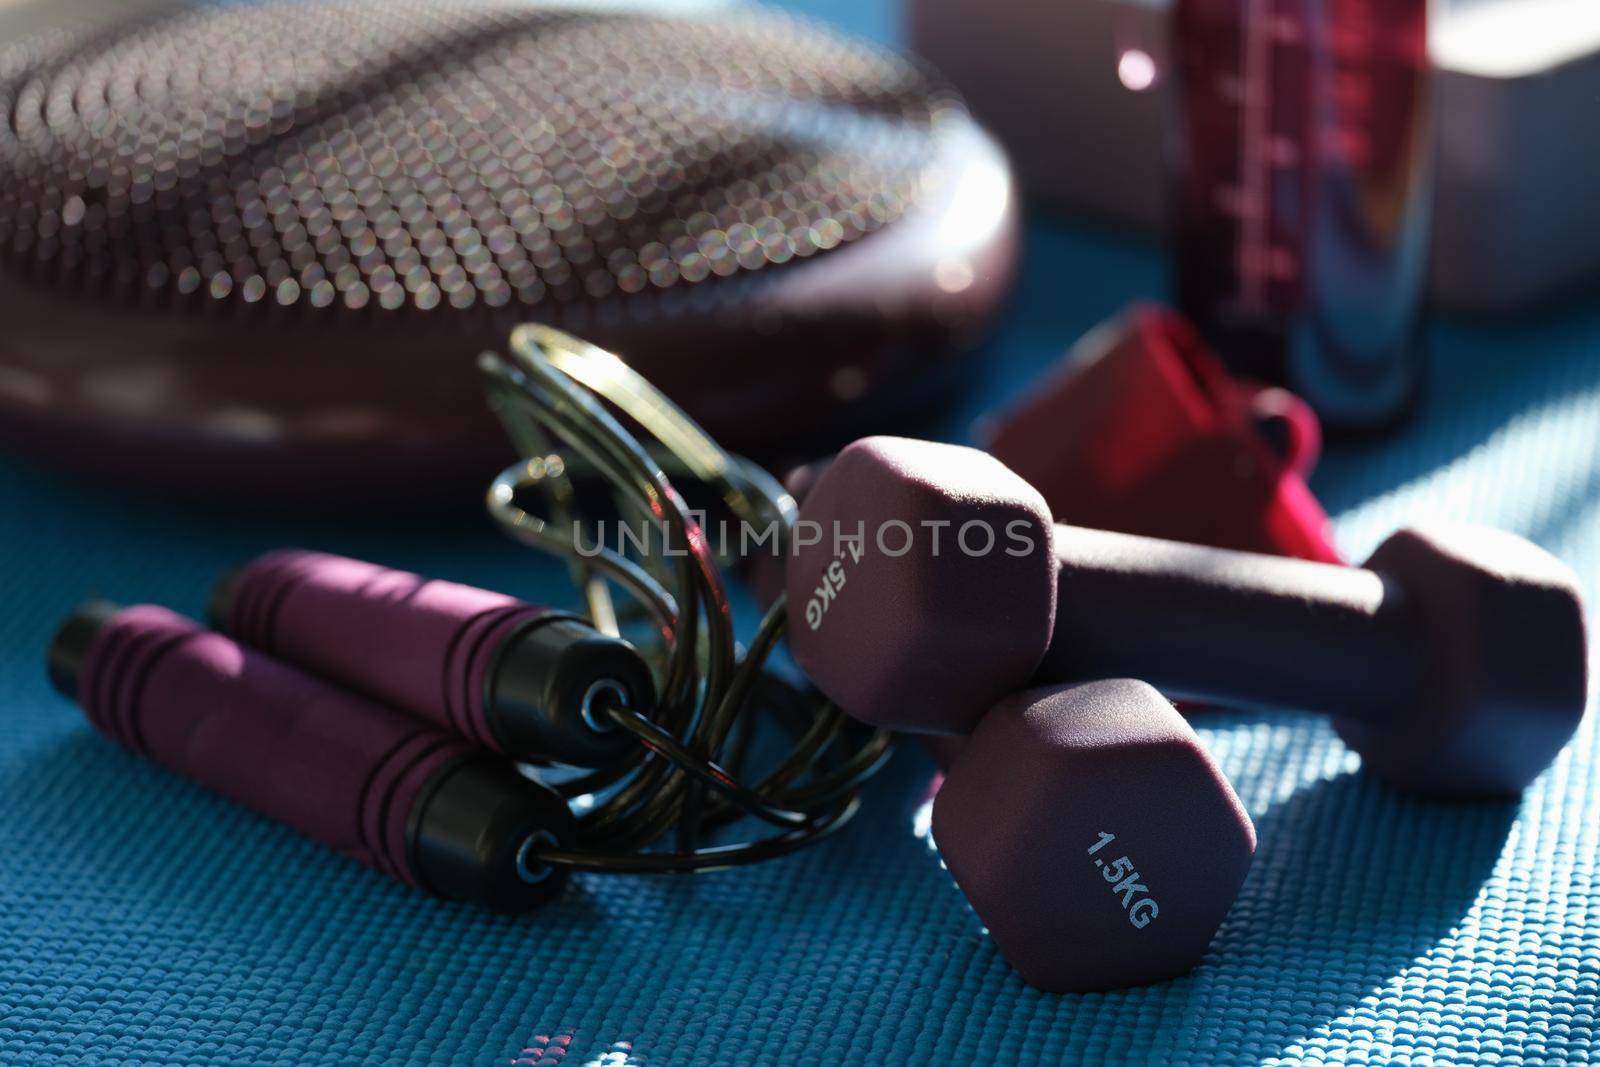 Burgundy skipping rope dumbbells and massager on a blue sports mat, close-up, blurry. Fitness set, sun glare